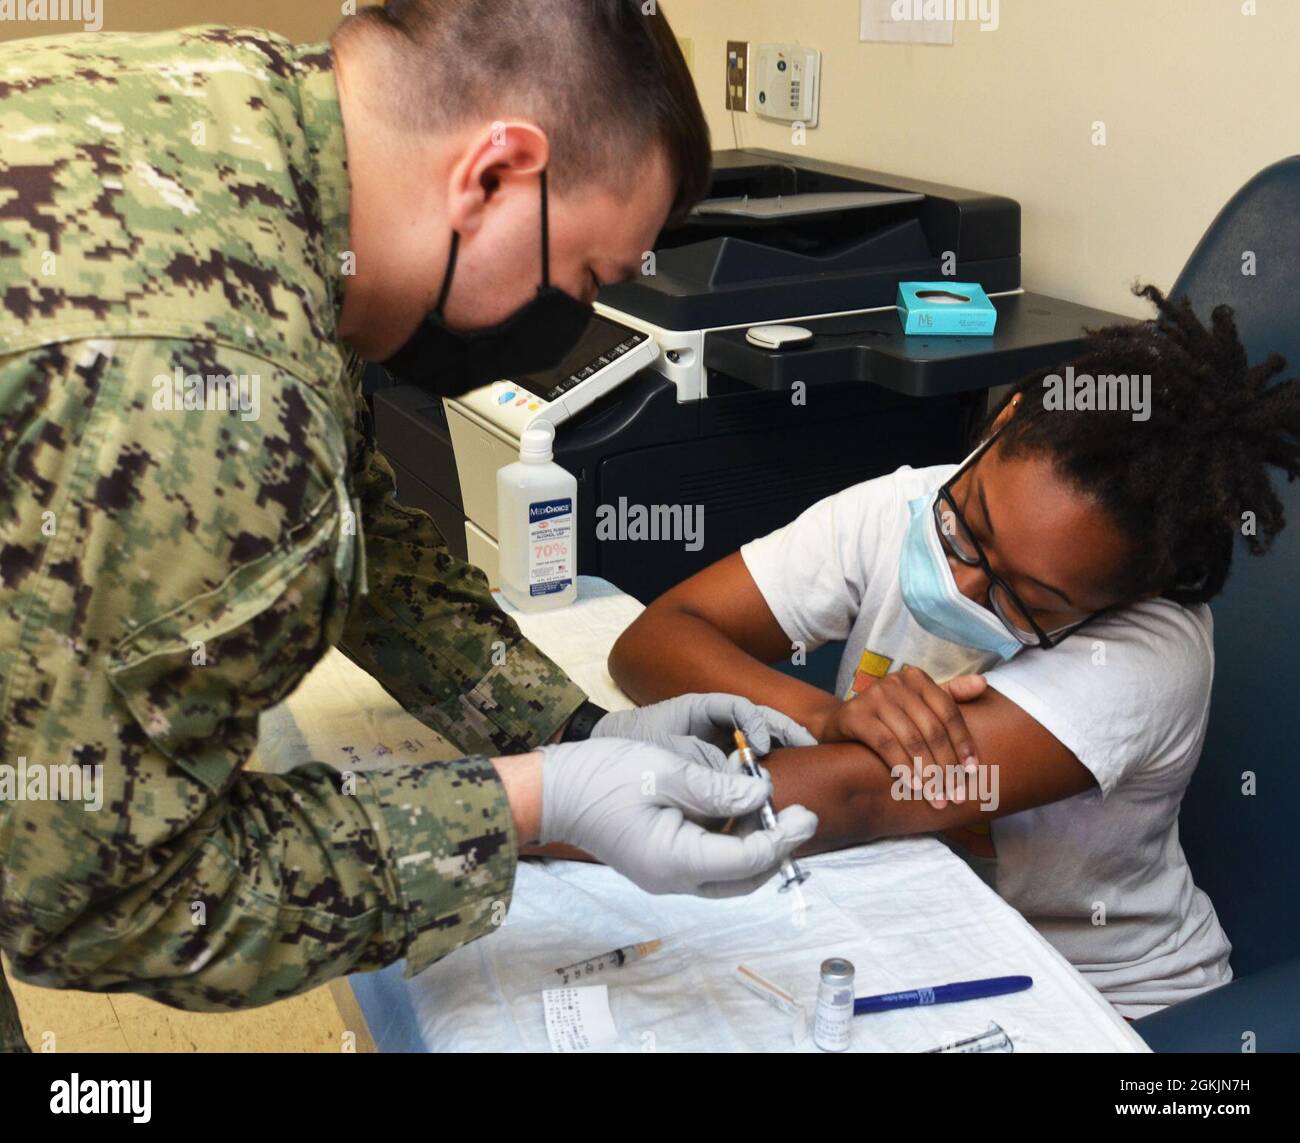 JACKSONVILLE, Fla. (May 5, 2021) - Hospital Corpsman 3rd Class Brian Krawsczyn, of Naval Hospital Jacksonville’s Allergy Clinic, conducts allergy testing with a sailor.  Krawsczyn, a native of Jefferson, Ohio, says, “For medical readiness, it’s important for sailors to know of any allergic reactions.”  May is Asthma and Allergy Awareness Month. Estimates are that about 25 million Americans have asthma, 32 million have food allergies, and 24 million have hay fever. Stock Photo